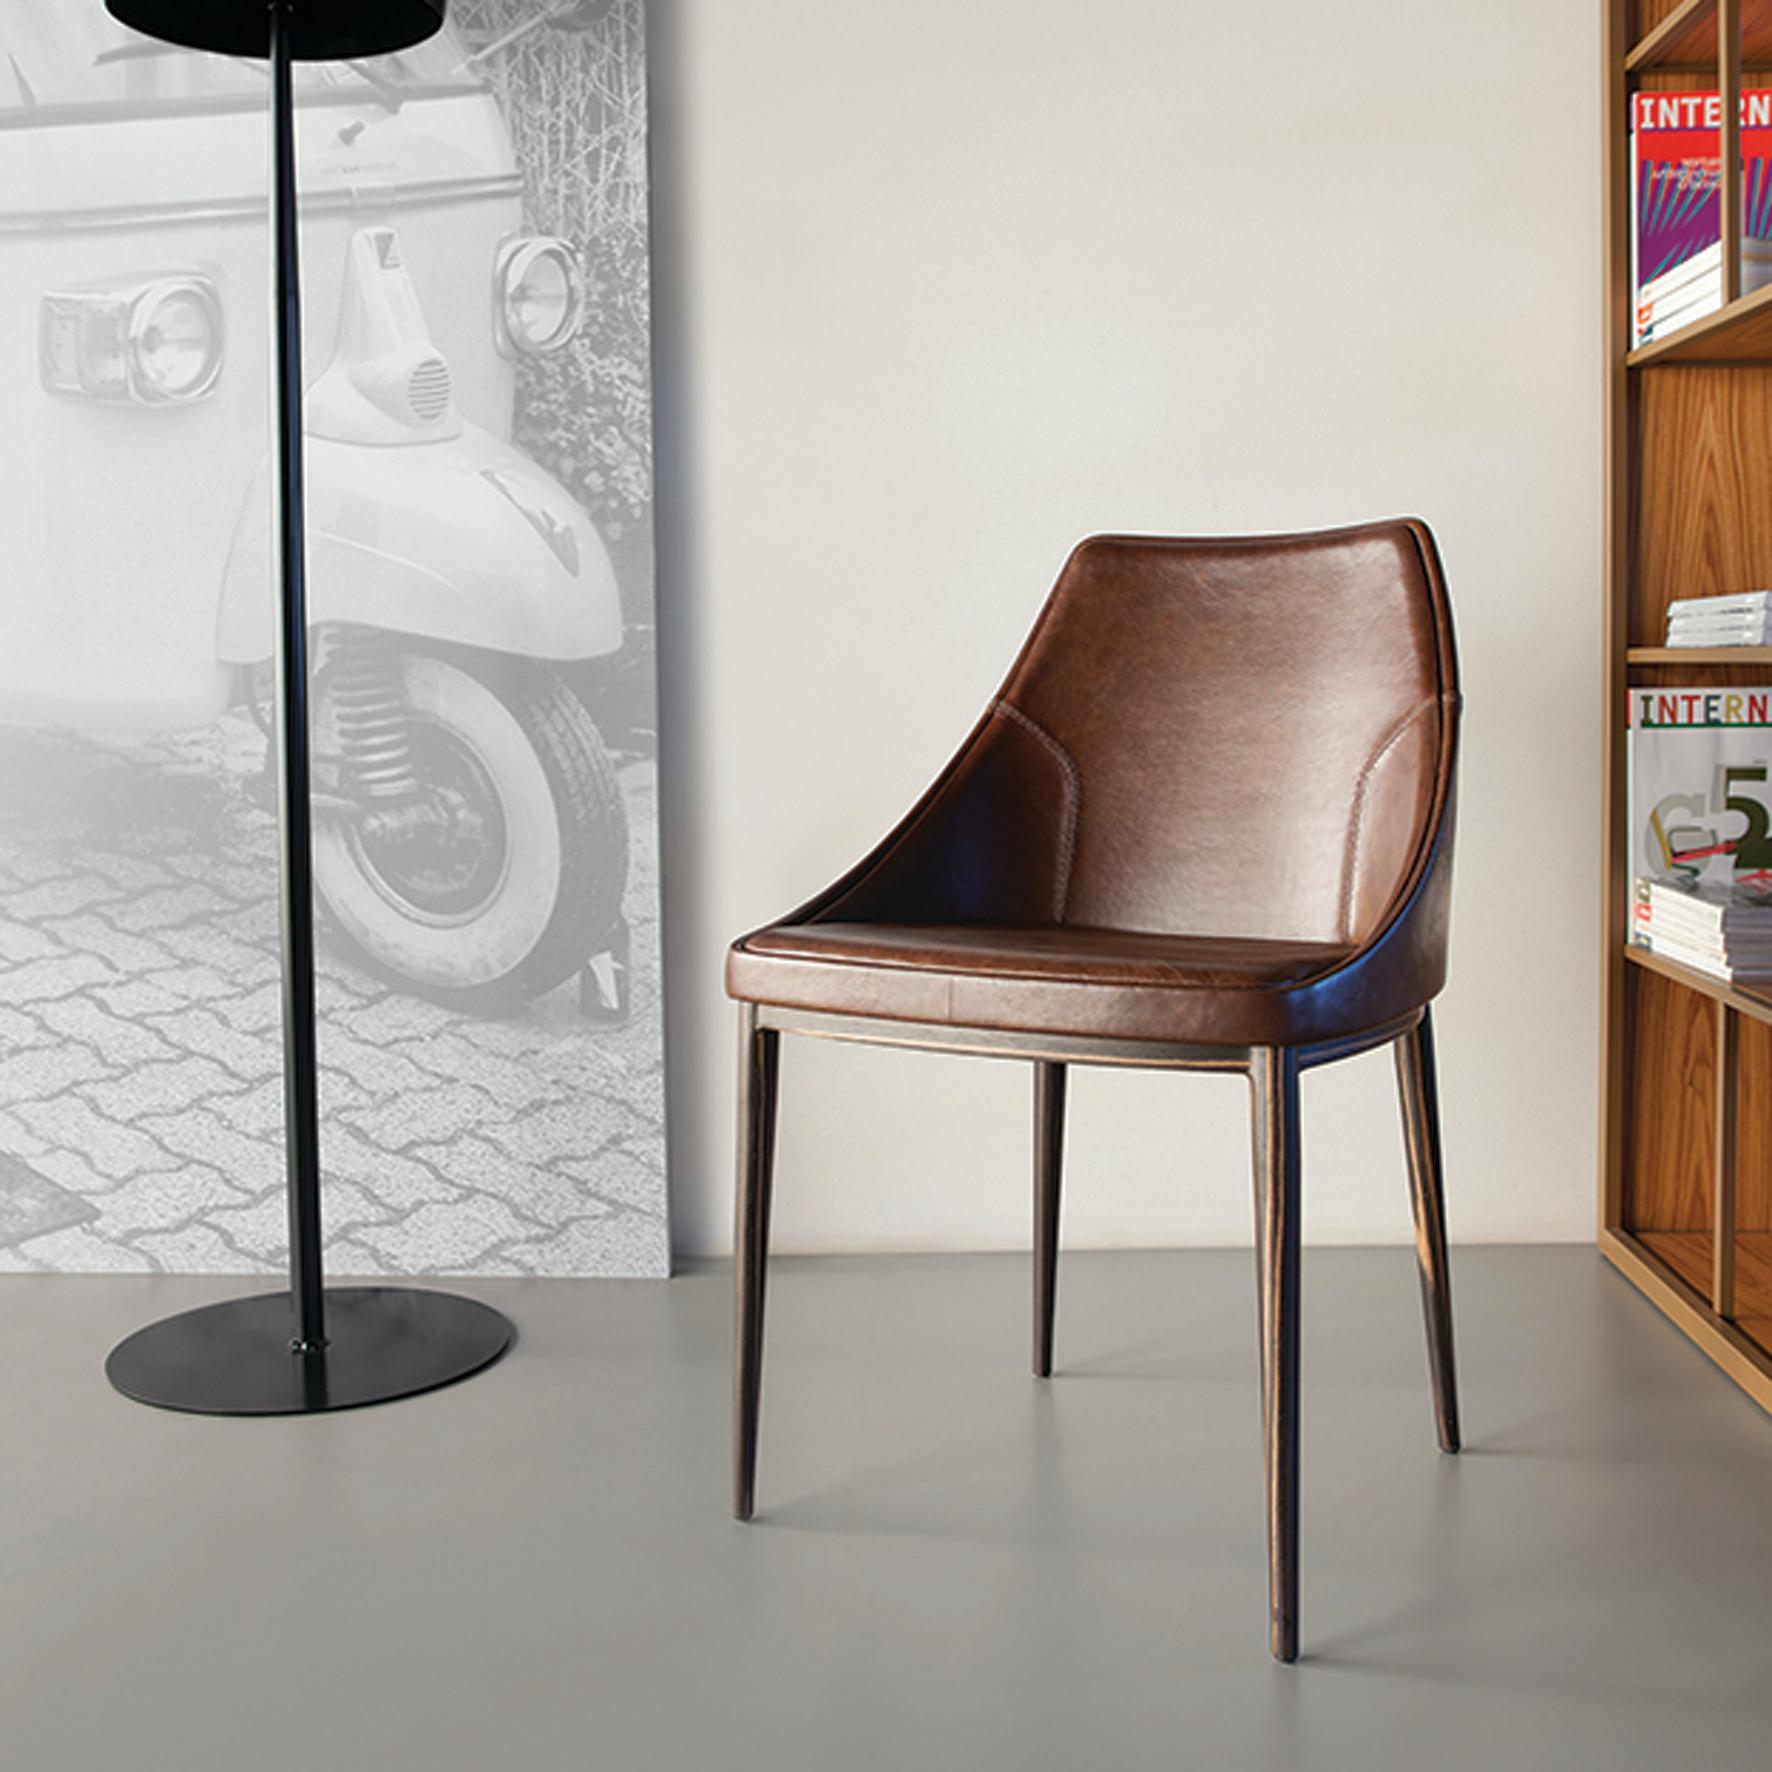 Bloo Chair by Doimo Brasil
Dimensions: W 50 x D 53 x H 79 cm 
Materials: Veneer and fiberglass chair with upholstered seat.


With the intention of providing good taste and personality, Doimo deciphers trends and follows the evolution of man and his